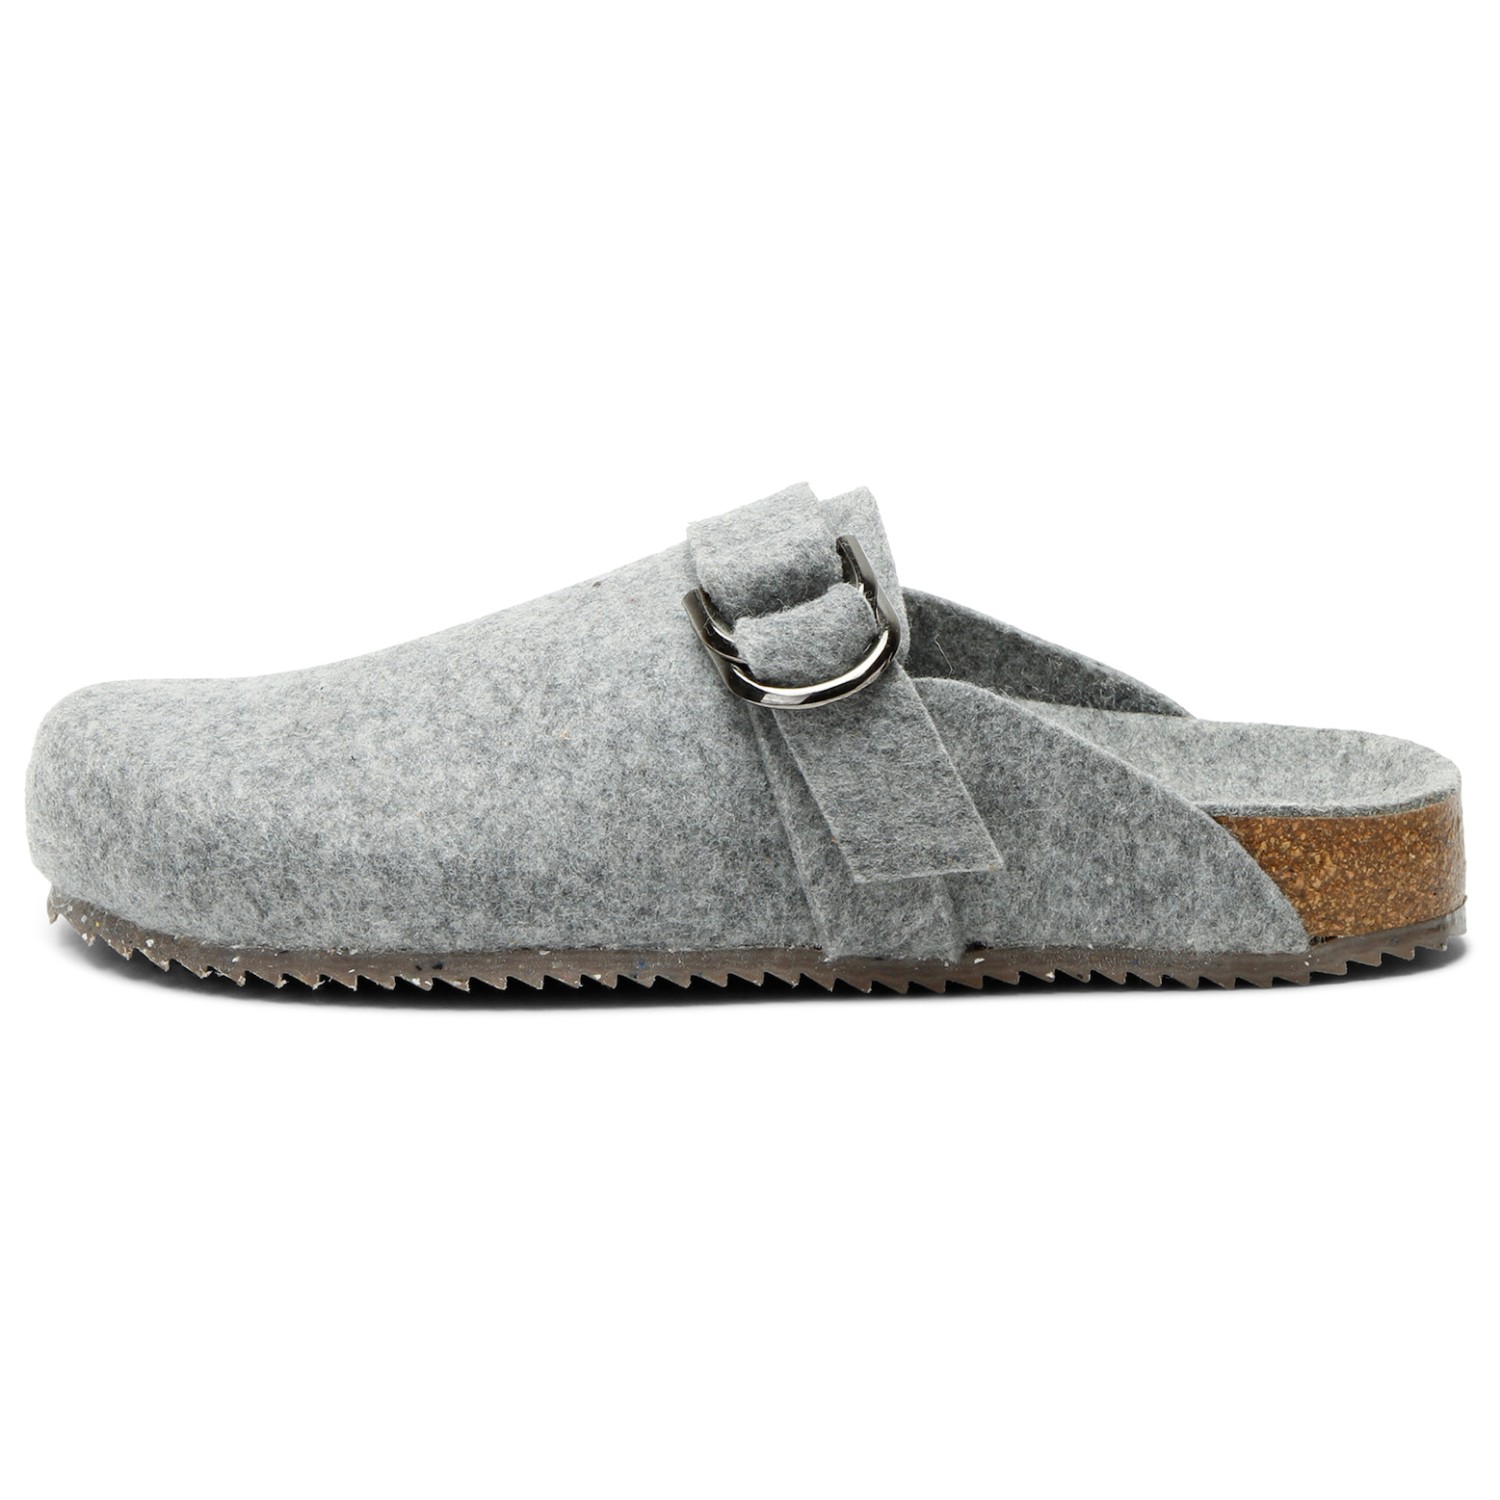 Grand Step Shoes - Uden Recycled Wool - Hüttenschuhe